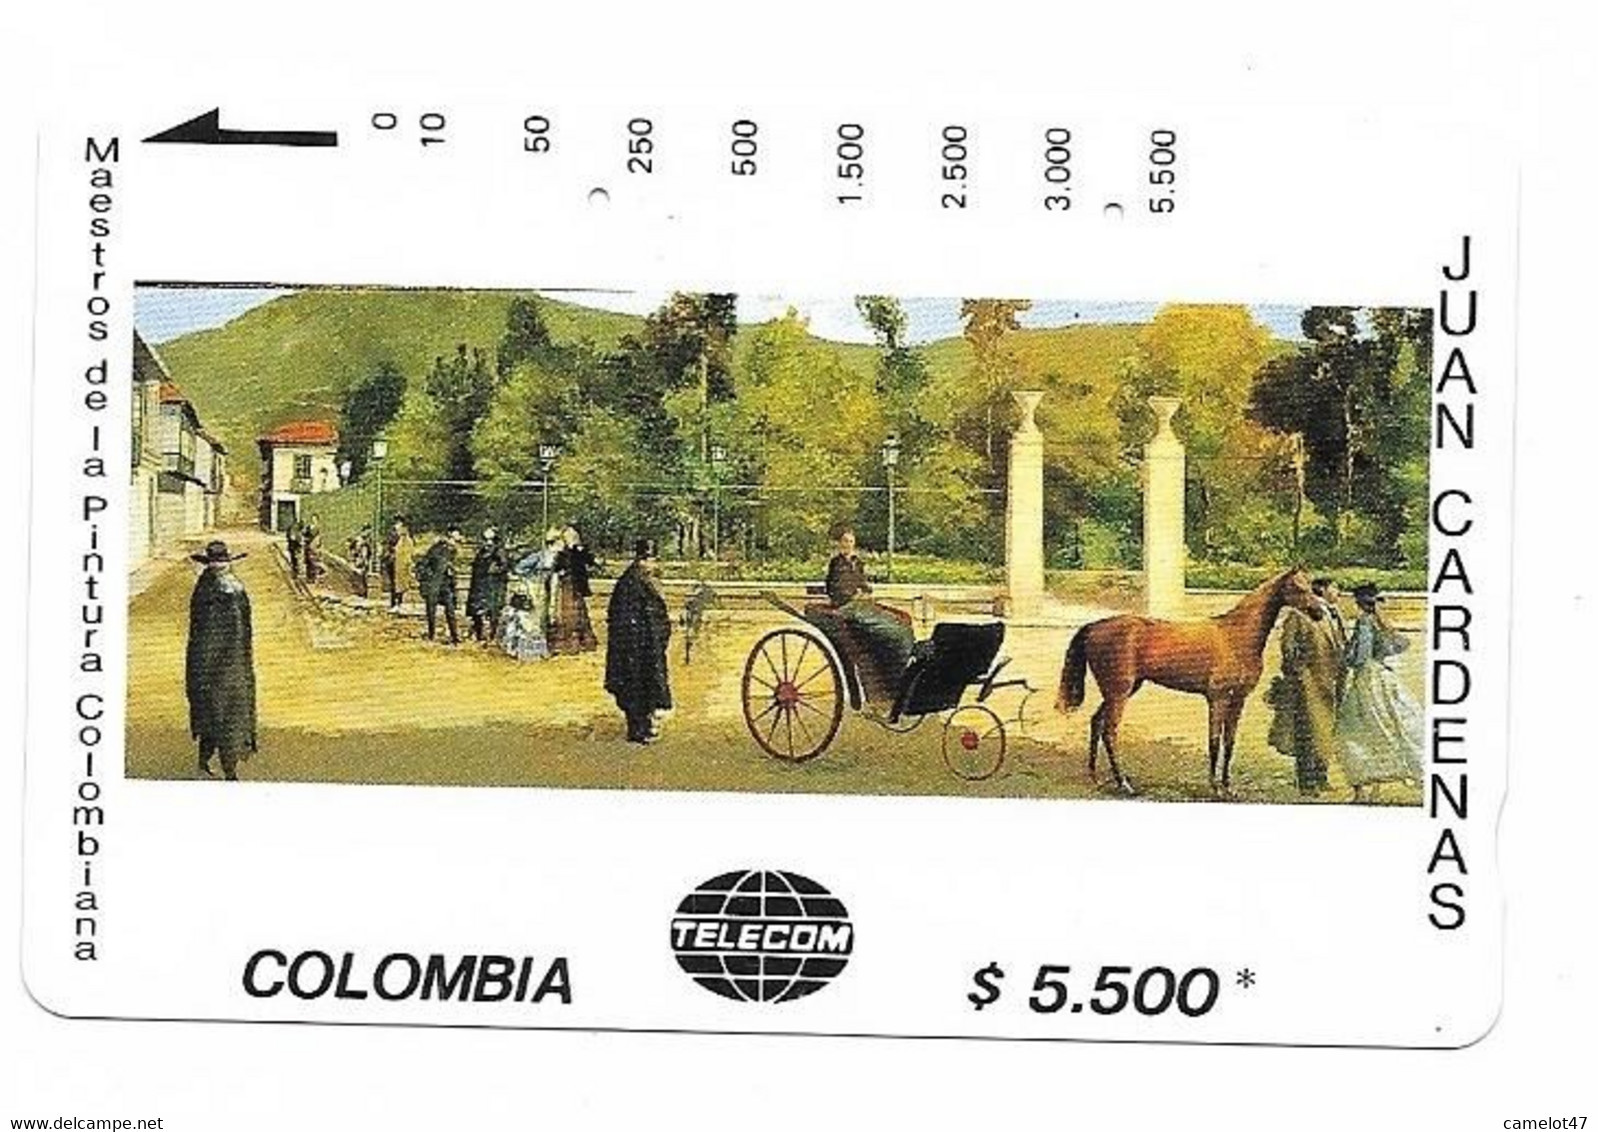 Colombia Tamura Used Phone Card, No Value, Collectors Item. Painting # Colombia-16 - Colombia